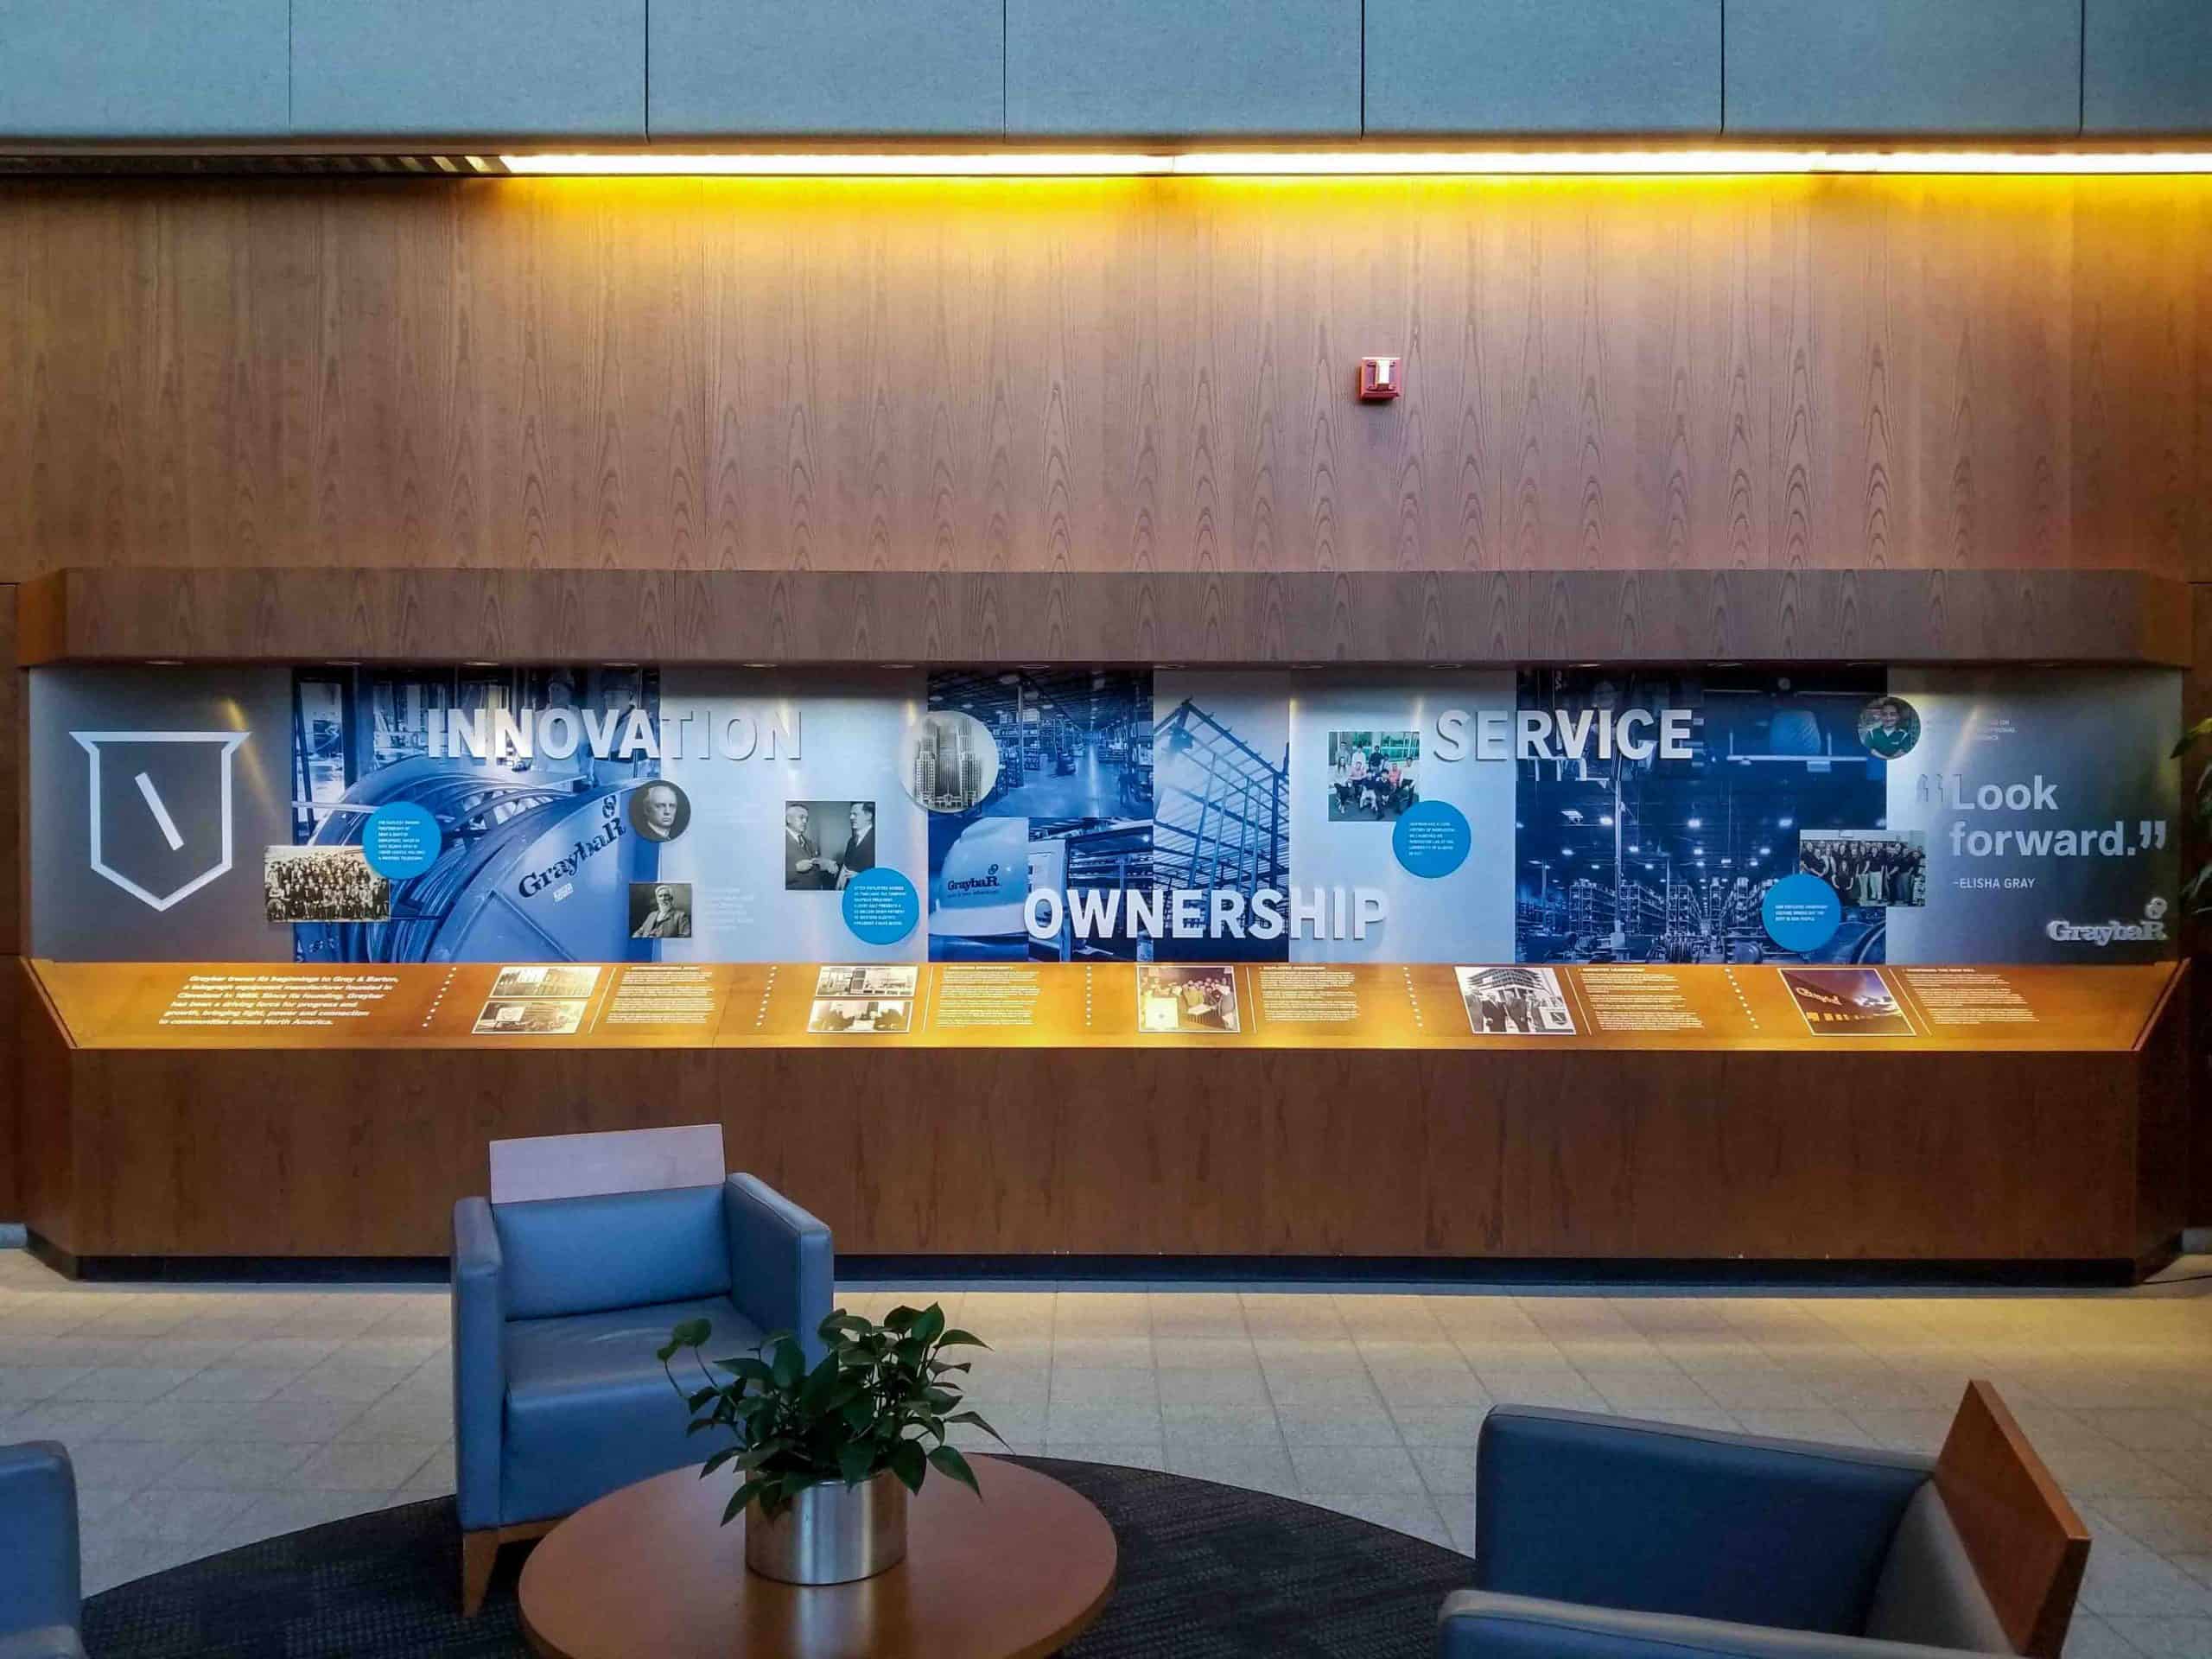 informational display with historic images and dimensional lettersets for timeline and educational exhibit for GraybaR office building